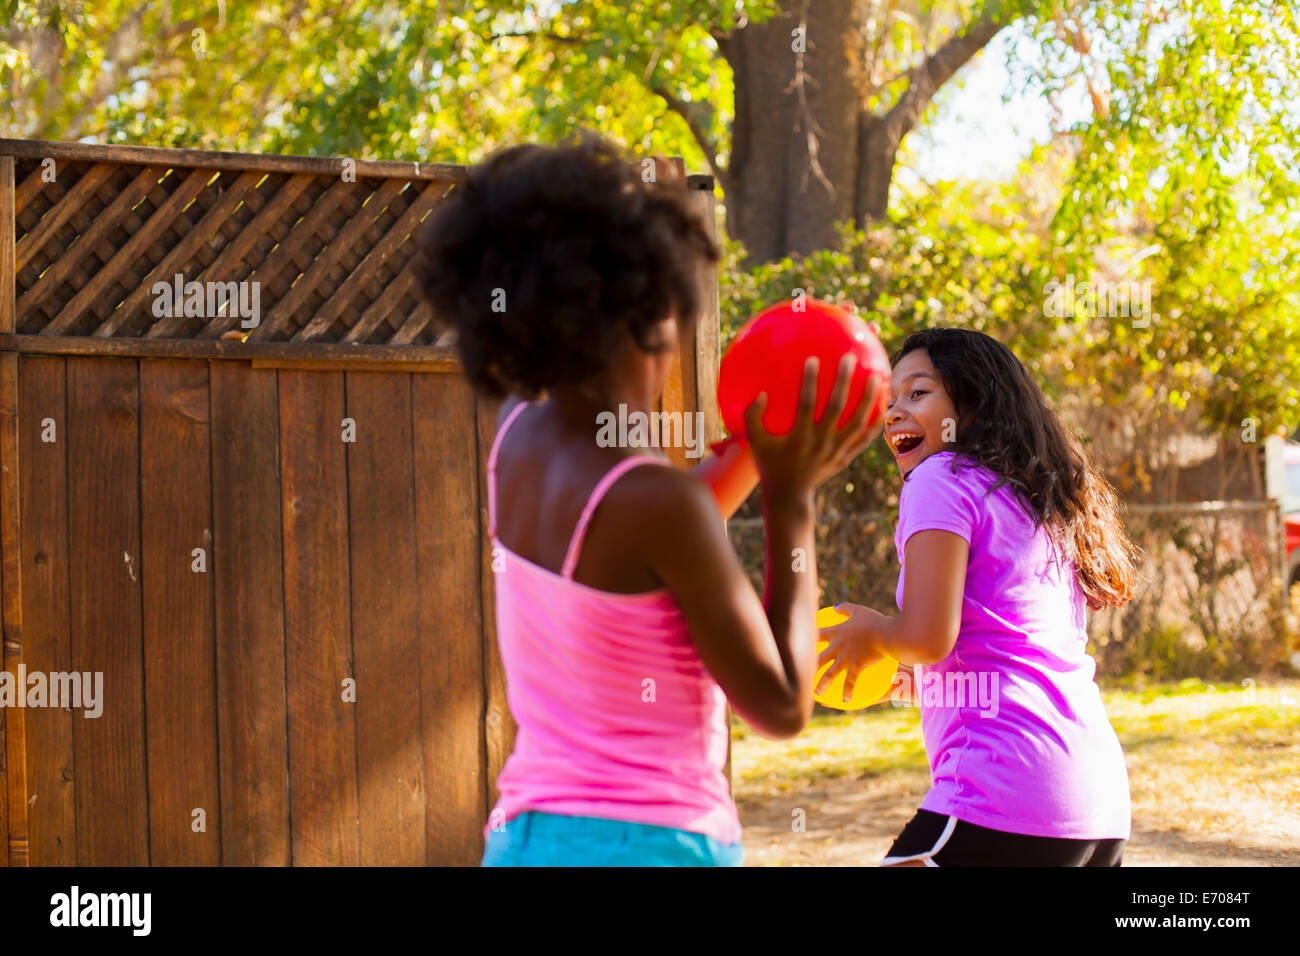 Girl chasing friend with water balloon in garden Stock Photo